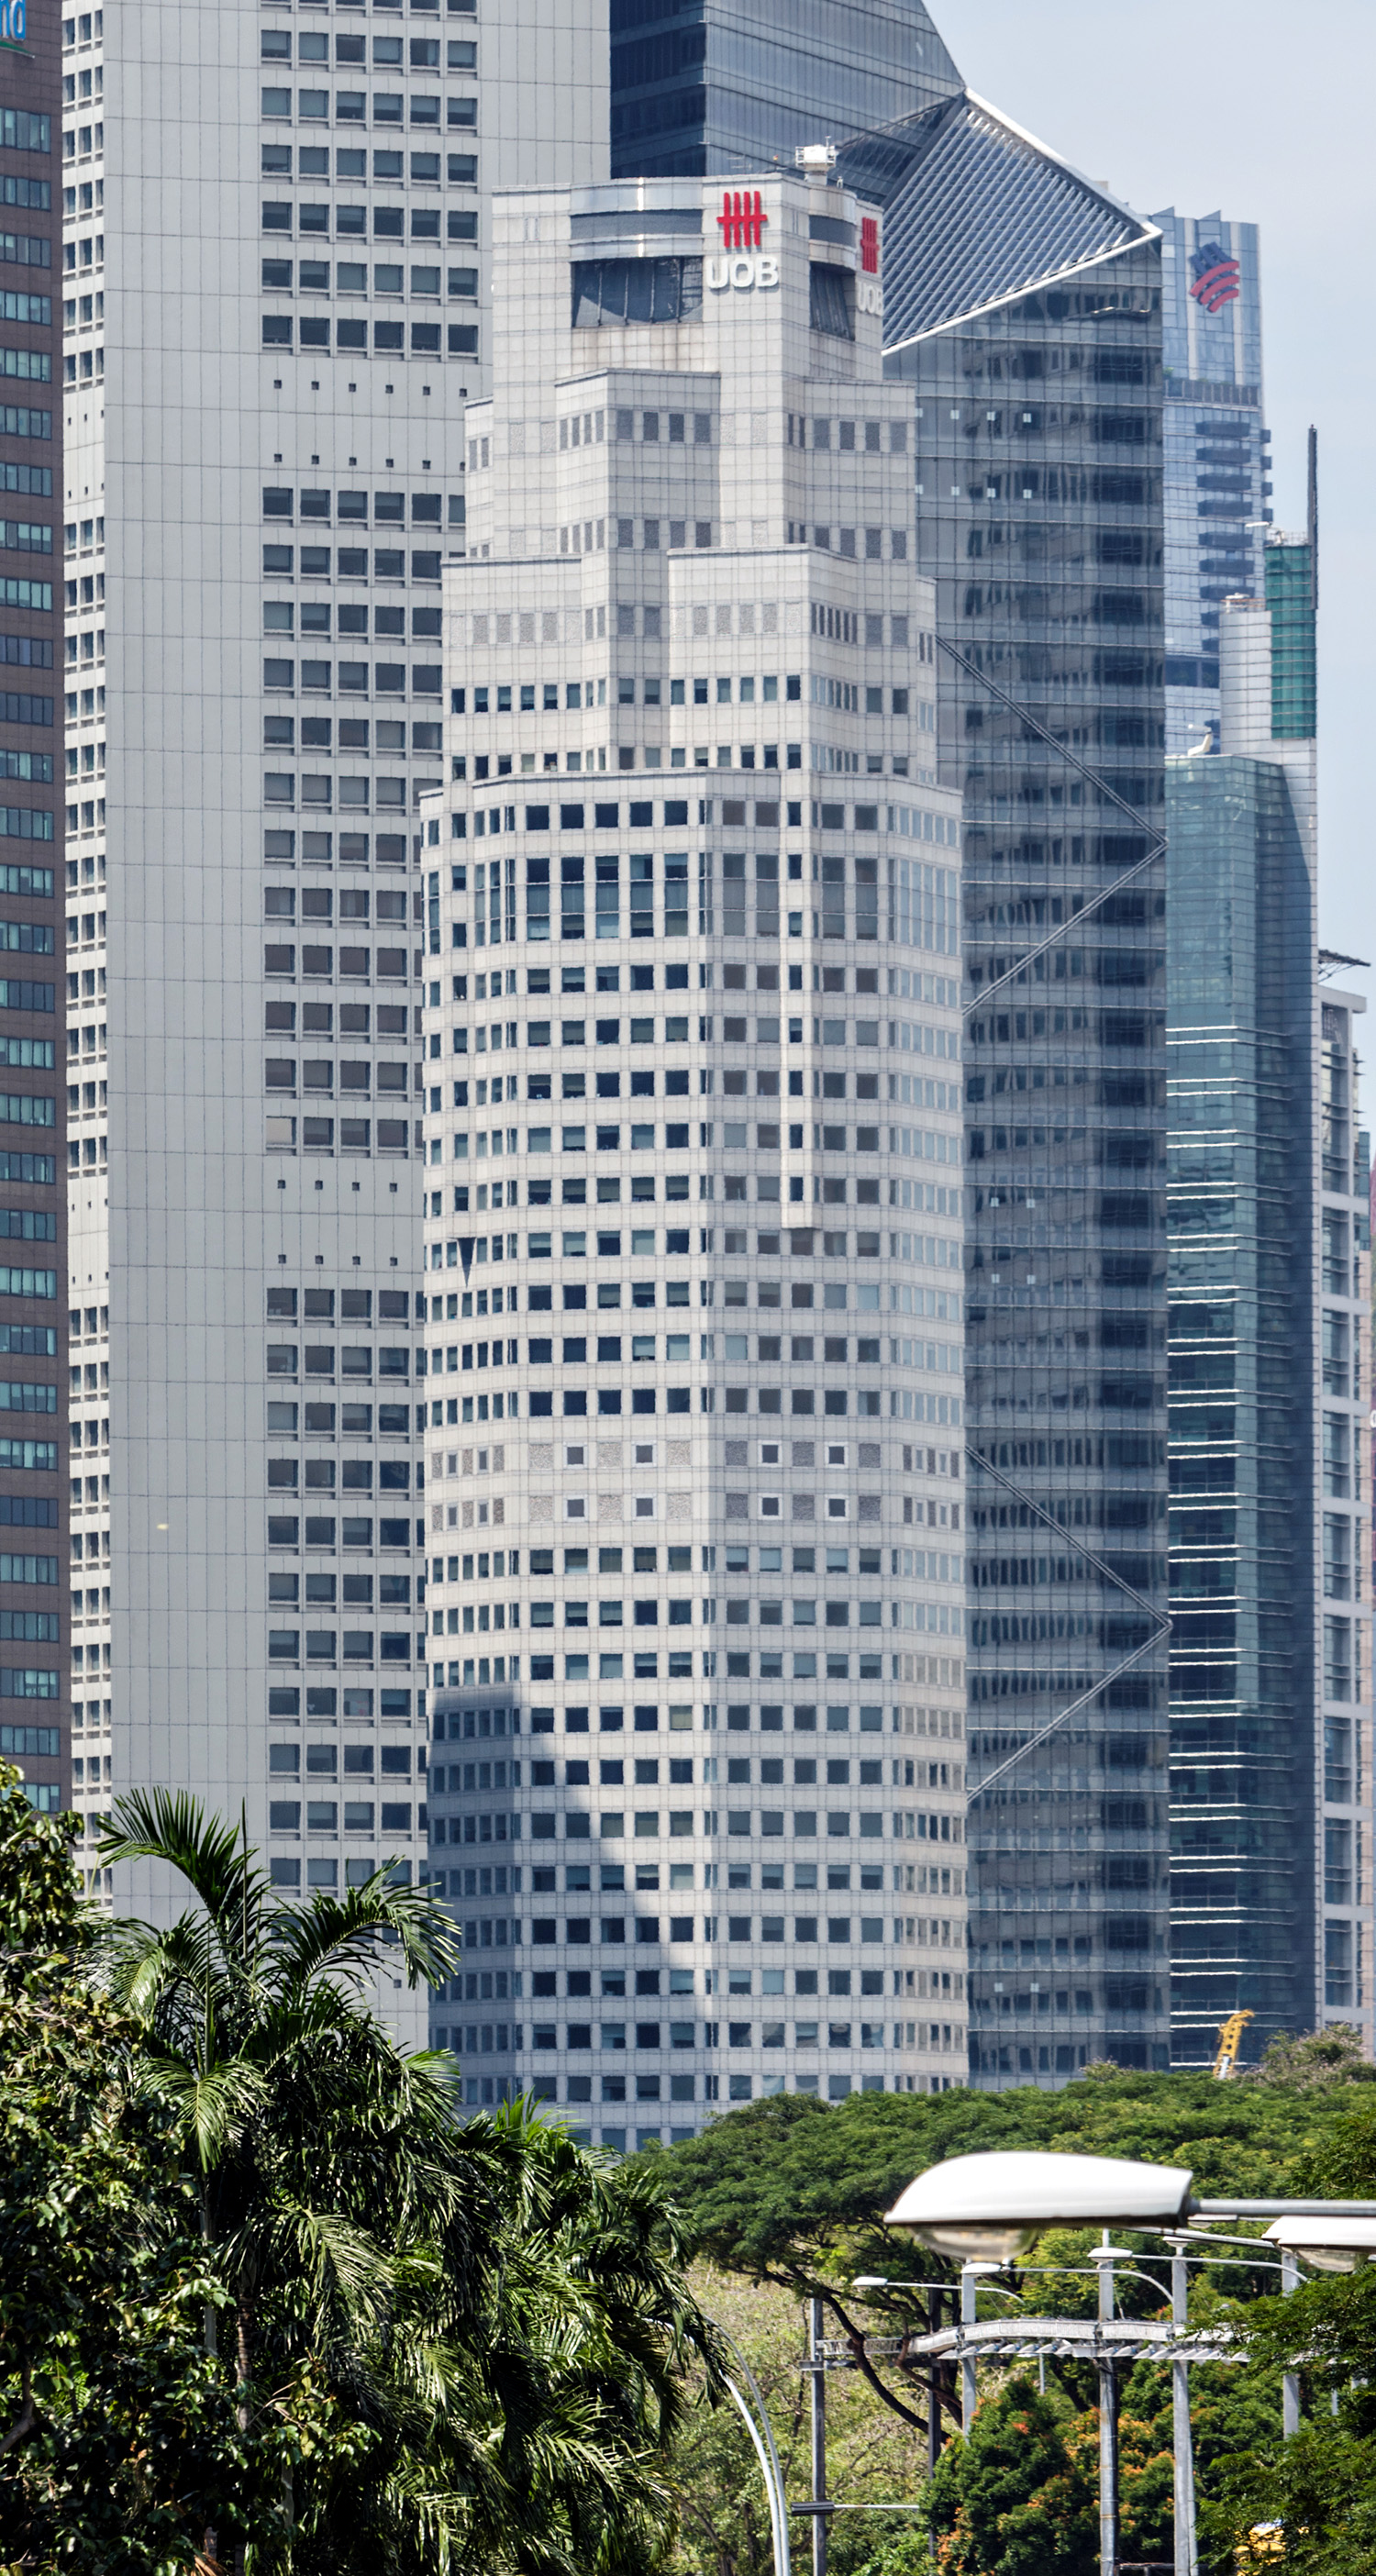 UOB Plaza 2, Singapore - View from the northeast. © Mathias Beinling